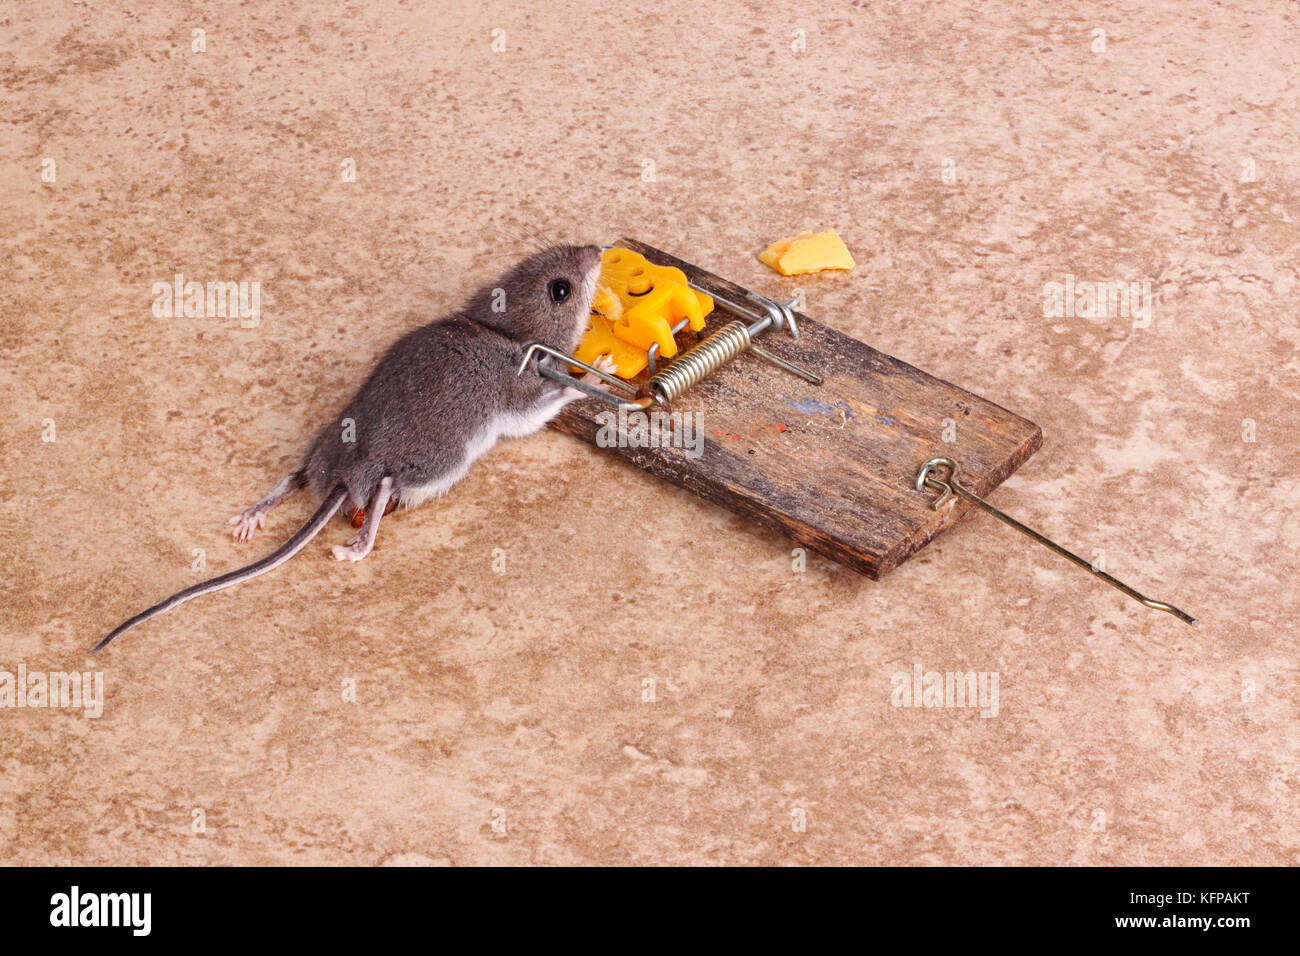 Common house mouse (Mus musculus) killed in a spring-loaded bar snap trap on a tile floor background Stock Photo